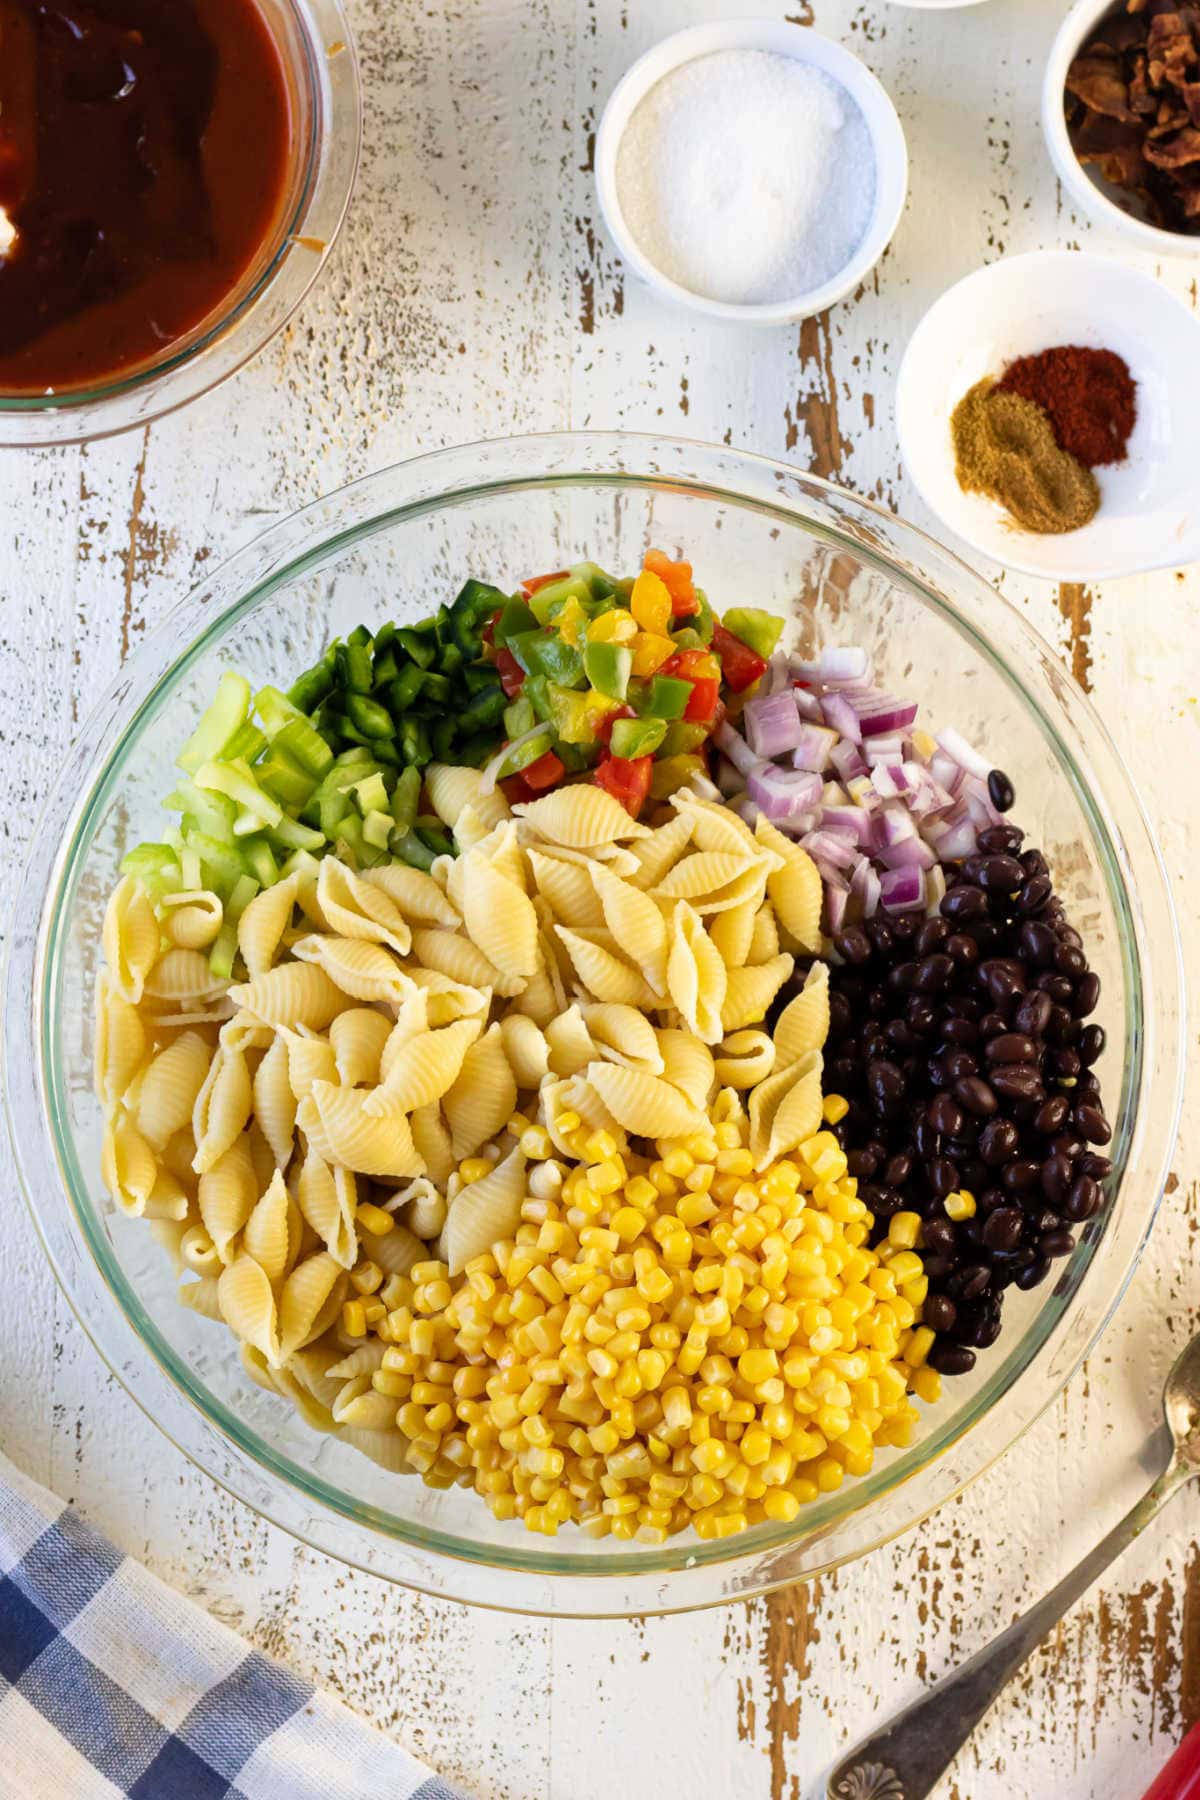 Ingredients for bbq macaroni salad in a bowl.